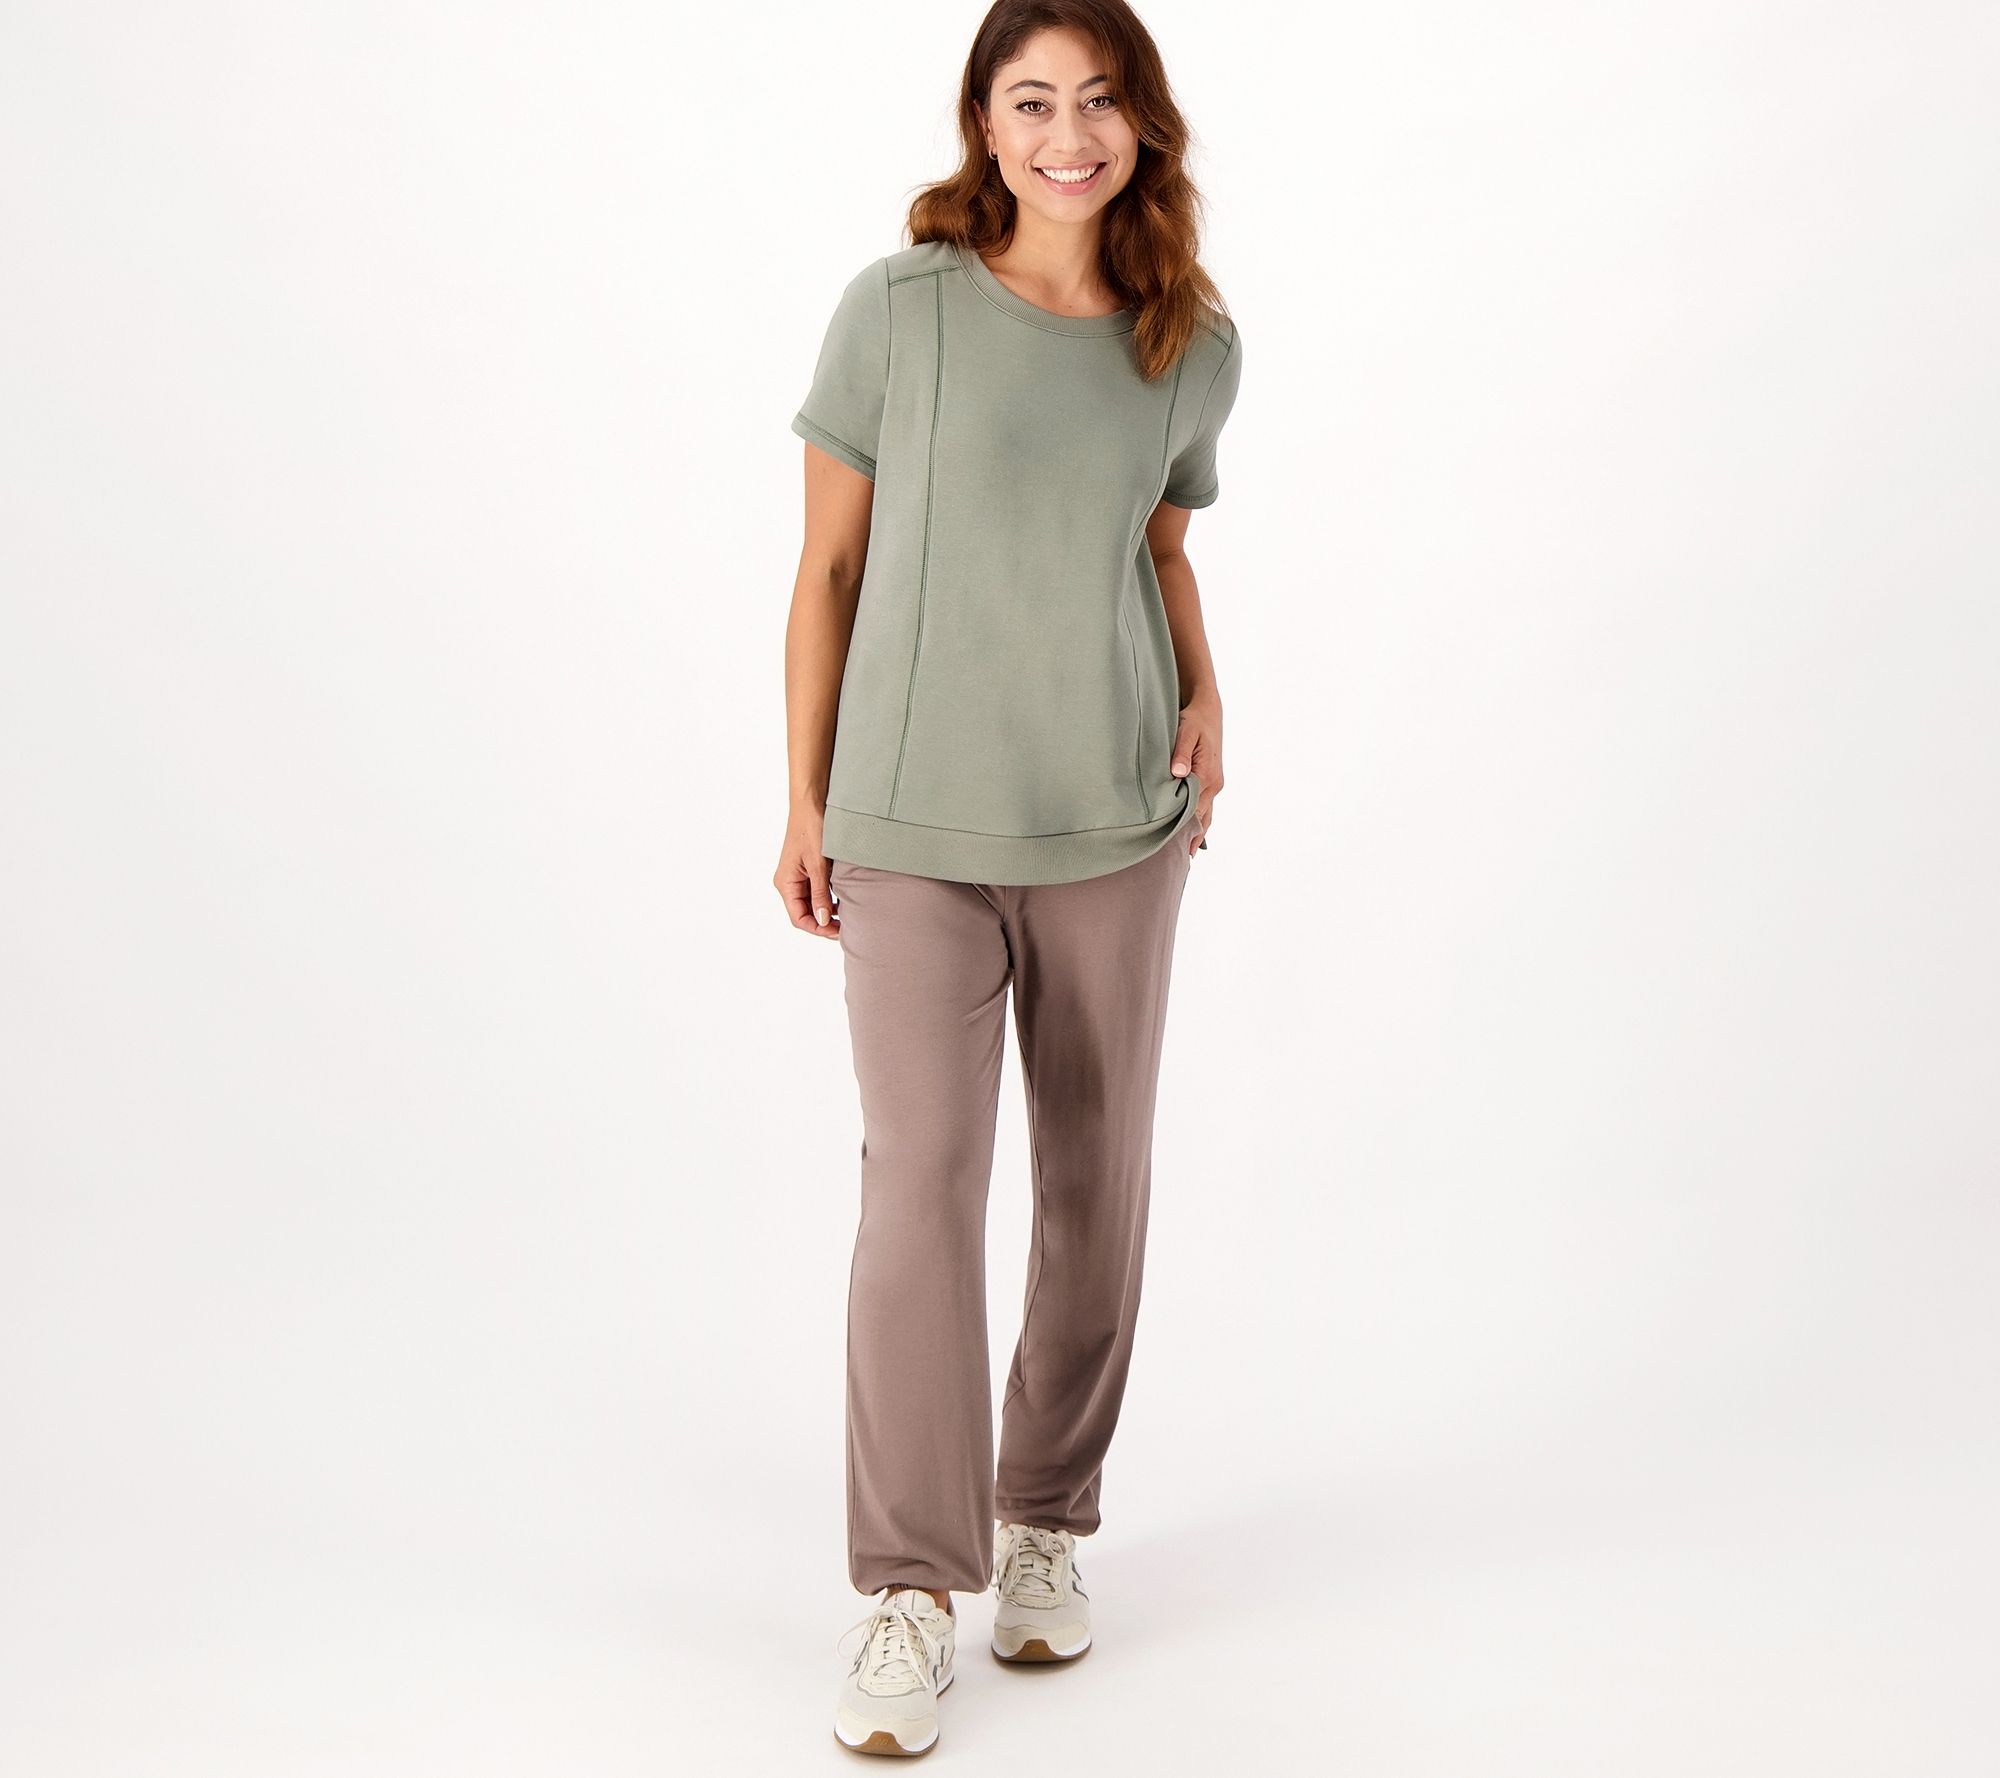 zuda Z-Knit Short Sleeve Top with Front Seaming - QVC.com